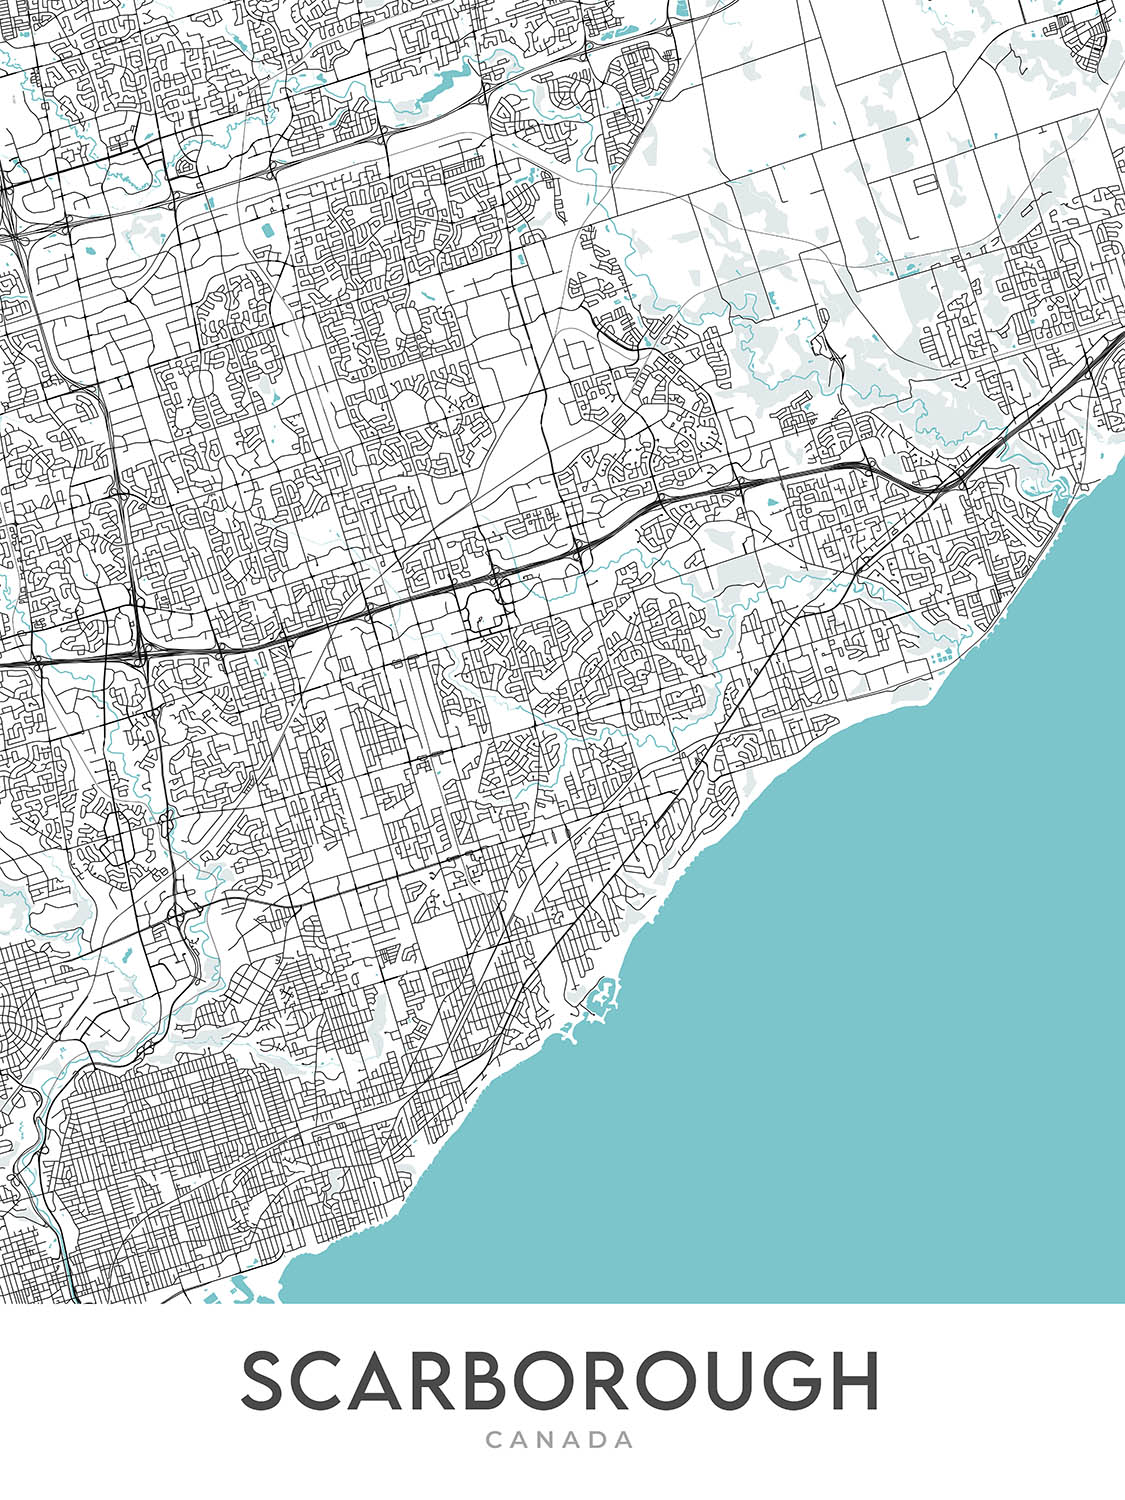 Modern City Map of Scarborough, Canada: Bluffs, Zoo, Town Centre